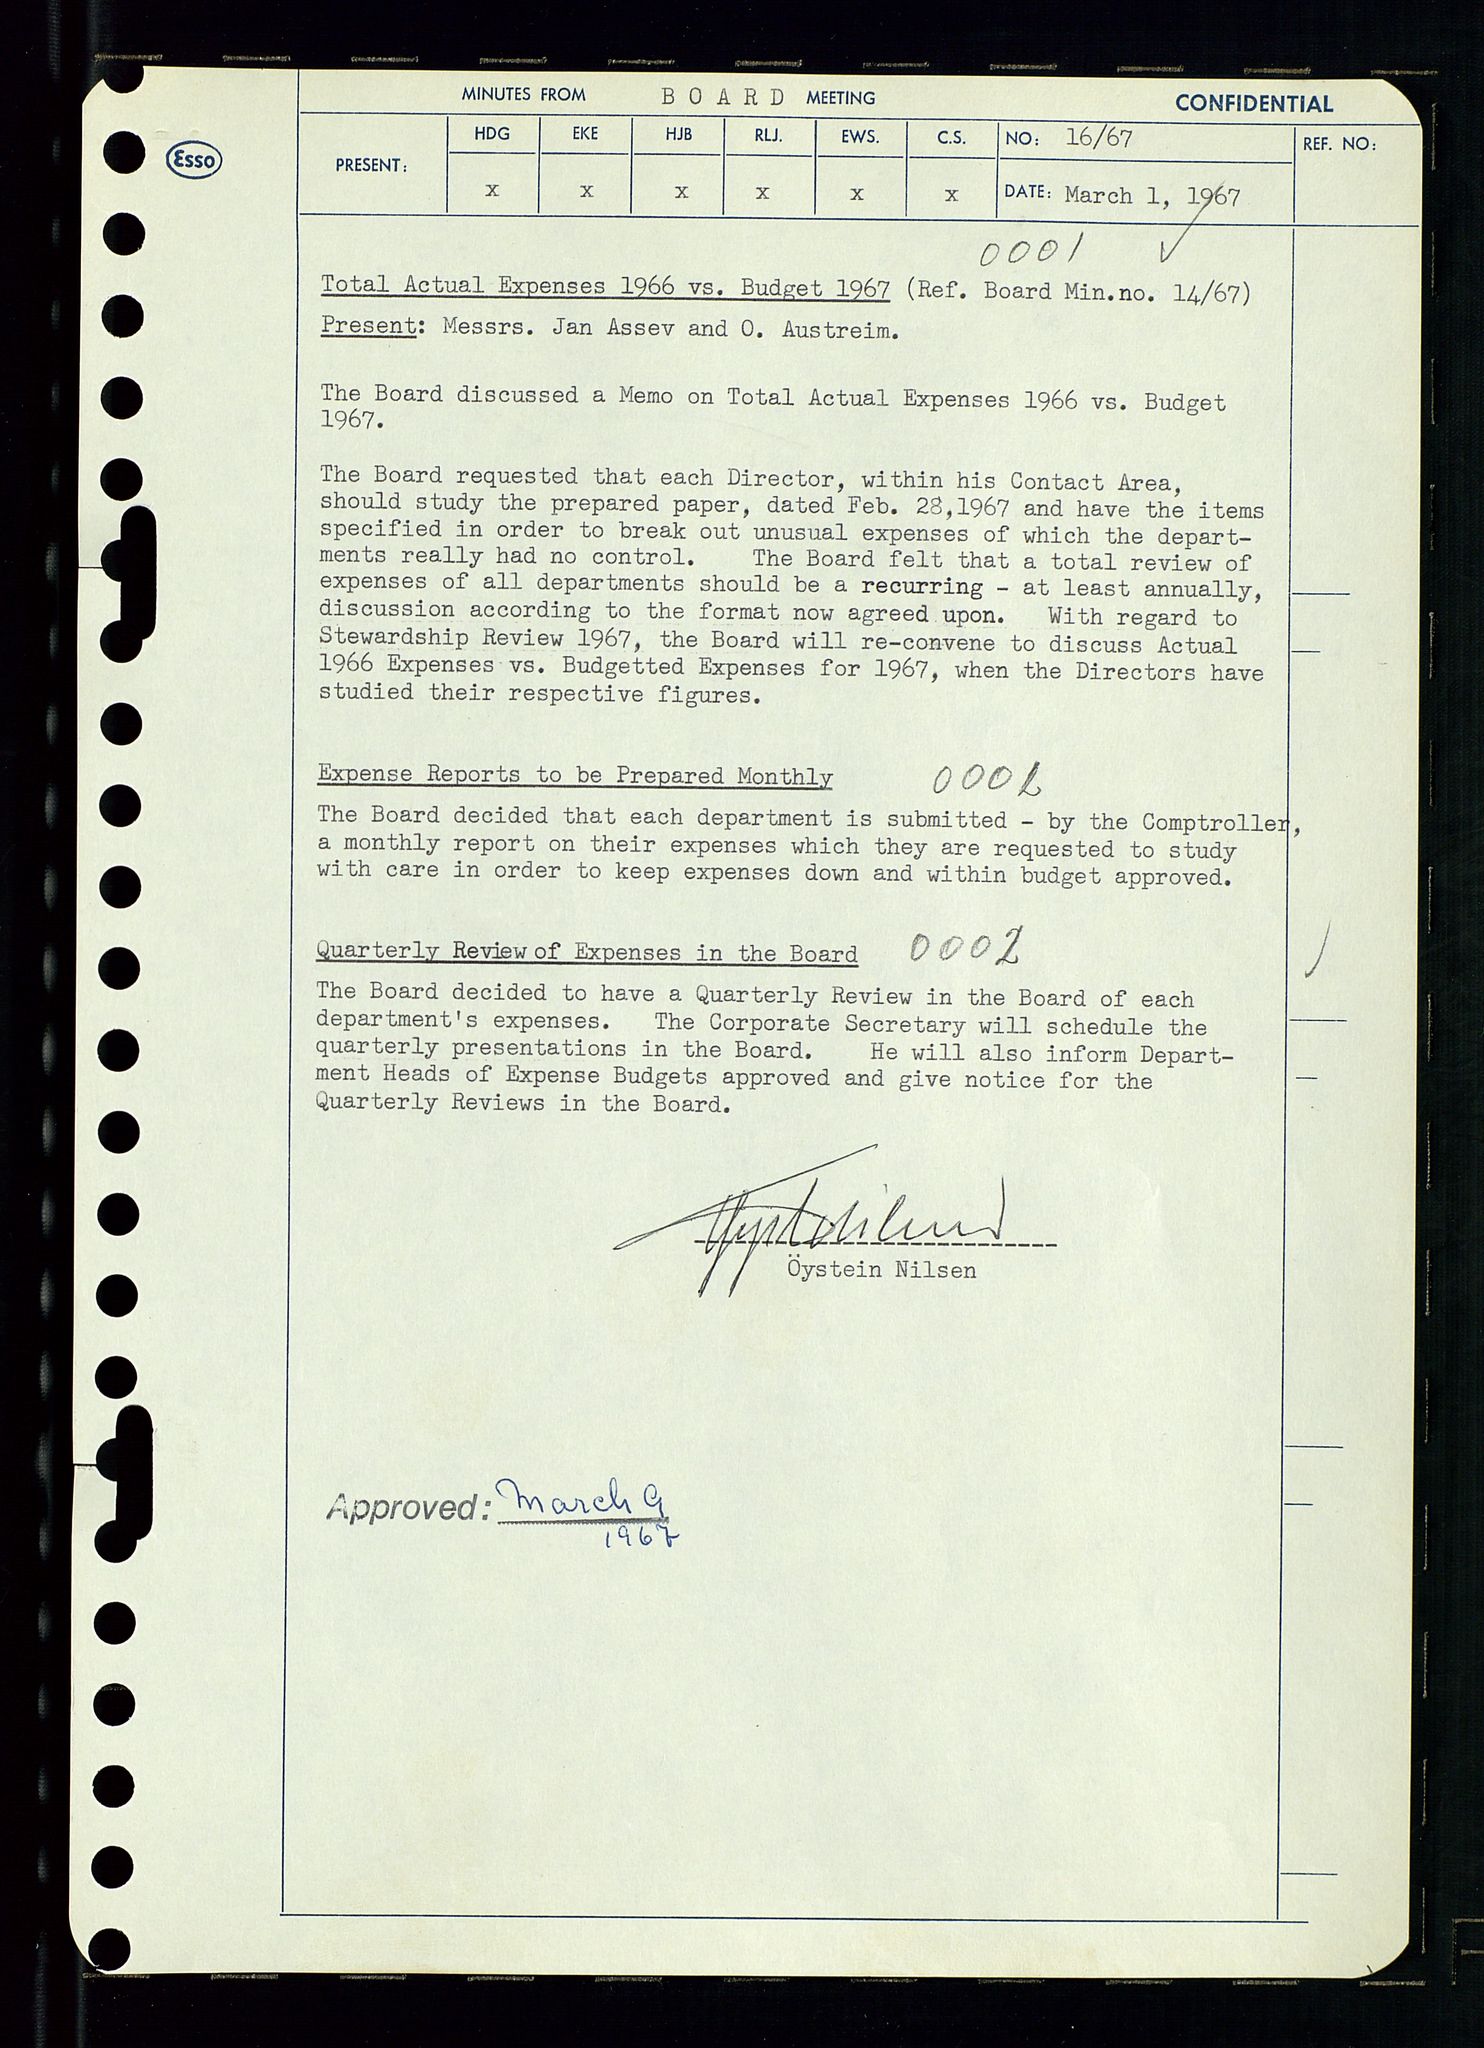 Pa 0982 - Esso Norge A/S, SAST/A-100448/A/Aa/L0002/0003: Den administrerende direksjon Board minutes (styrereferater) / Den administrerende direksjon Board minutes (styrereferater), 1967, p. 33